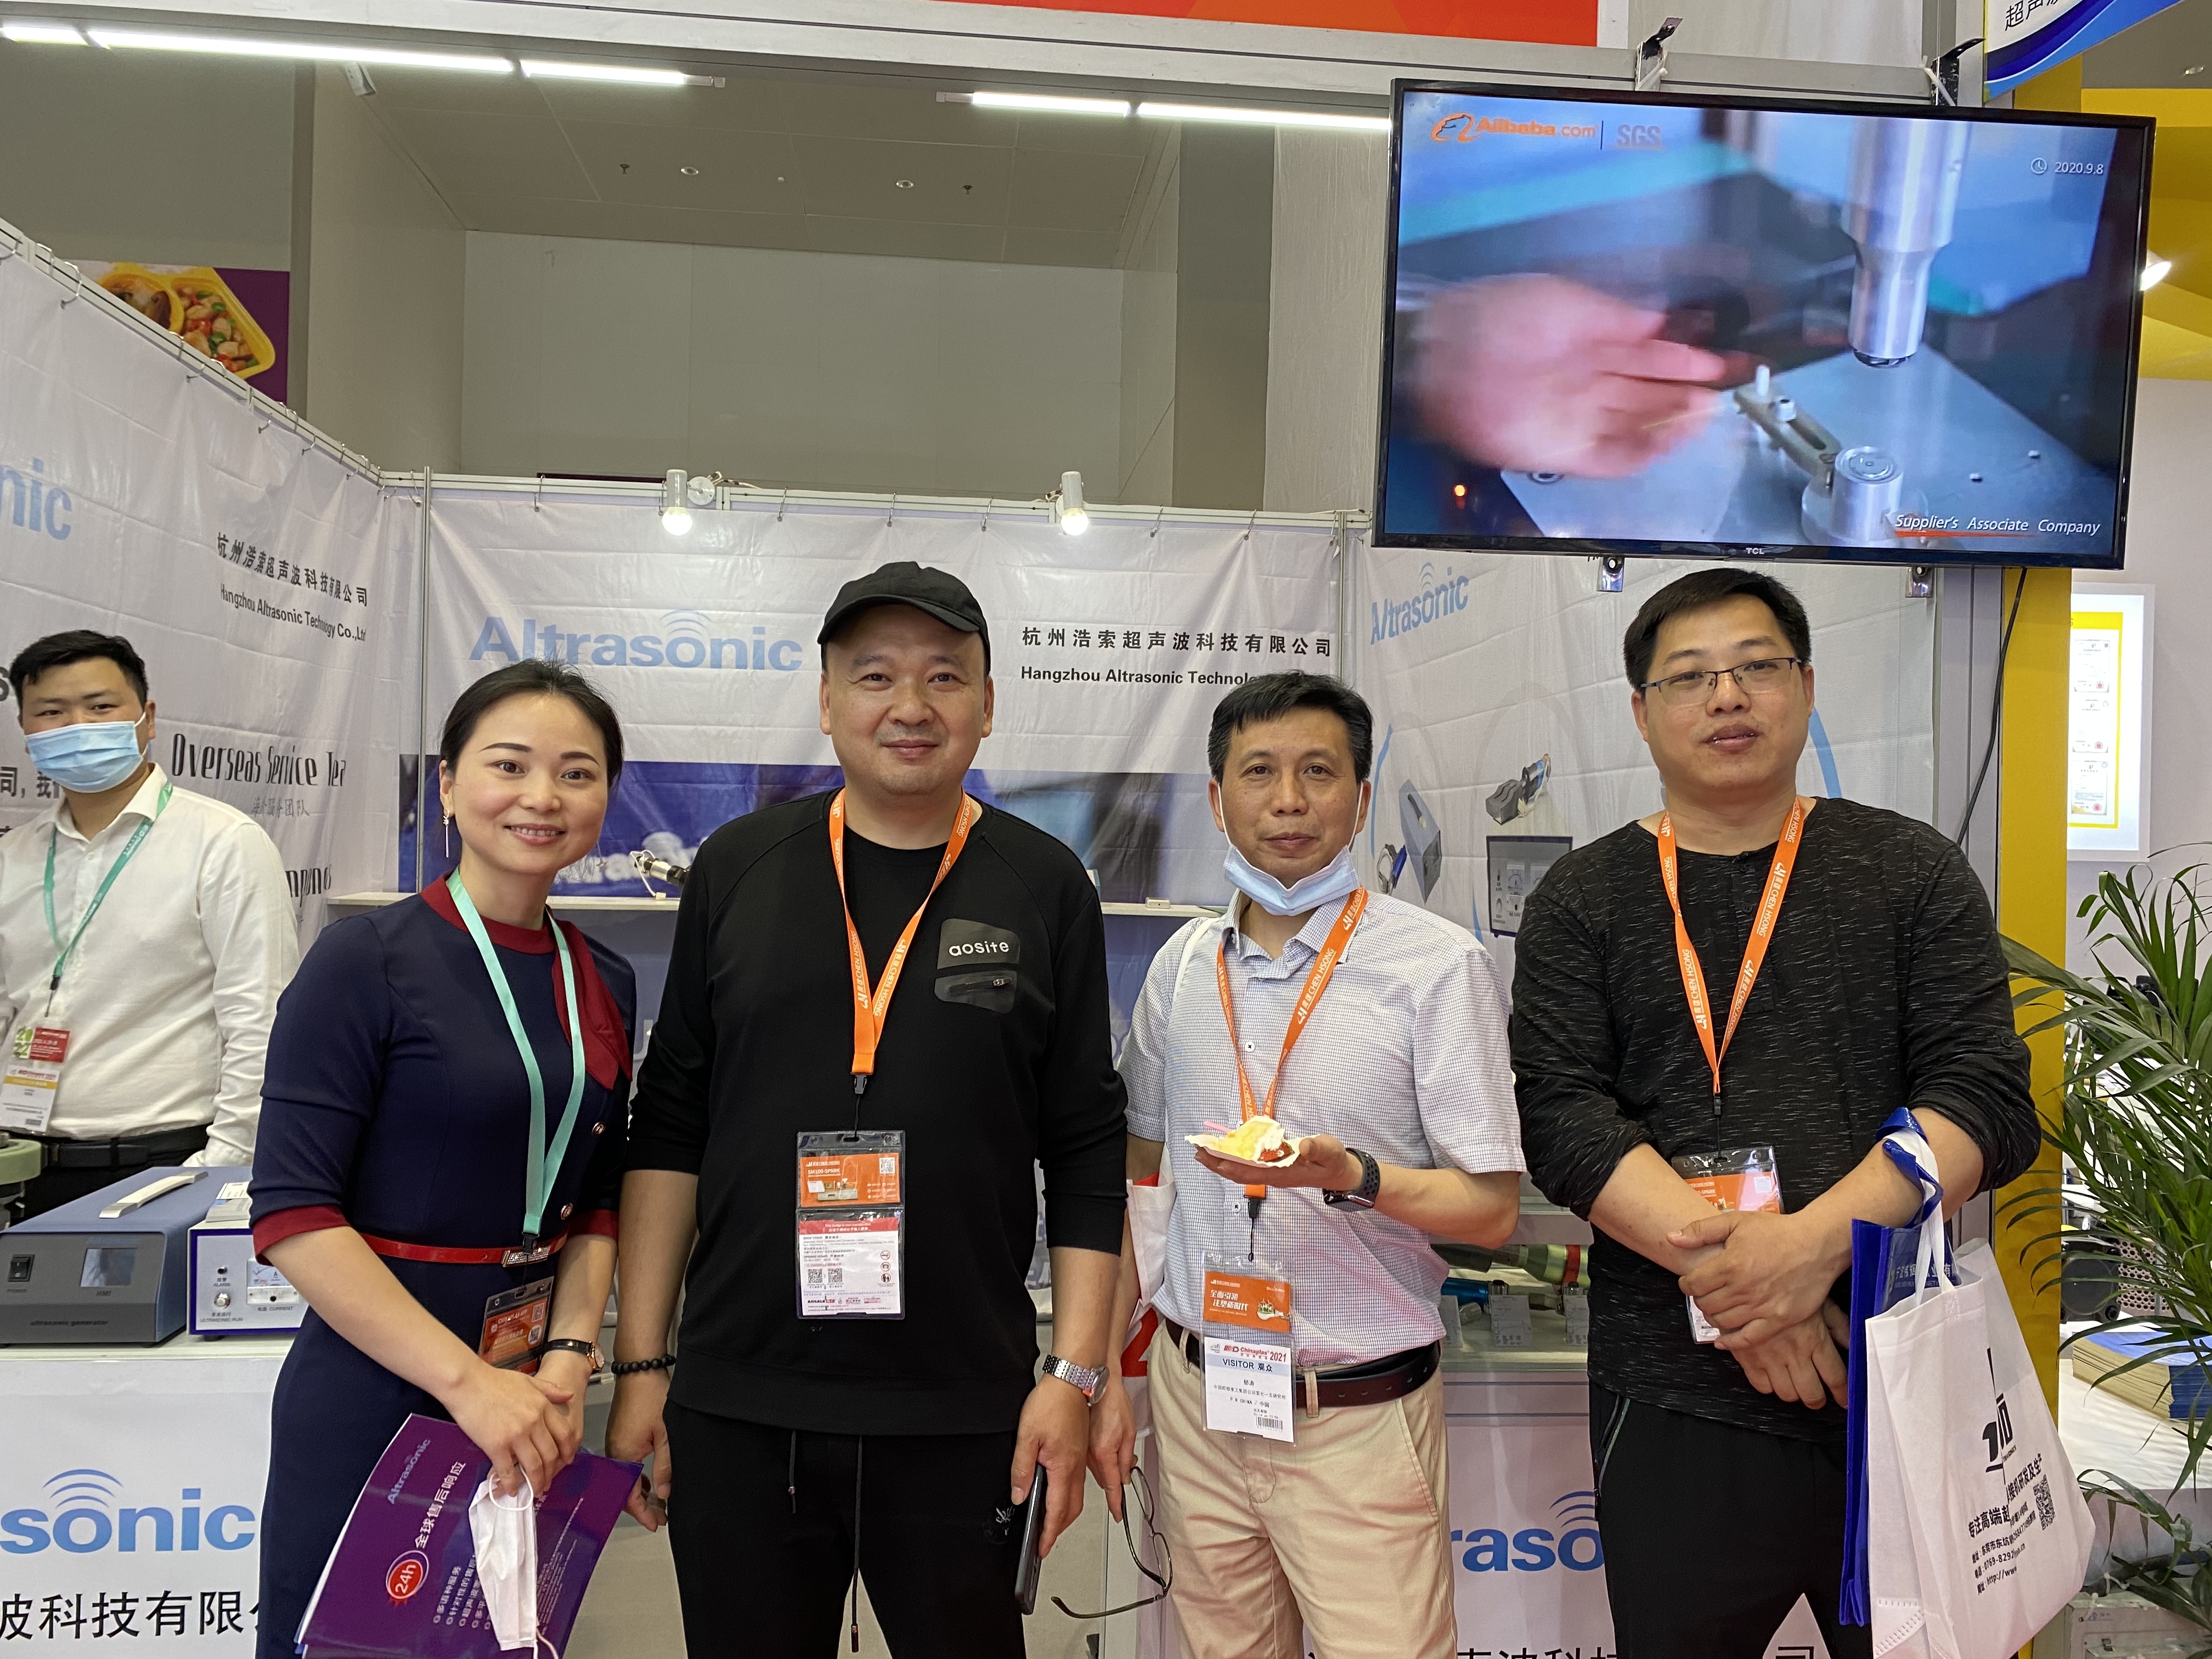  CHINAPLAS in Shenzhen----Welcom come to visit Altrasonic 